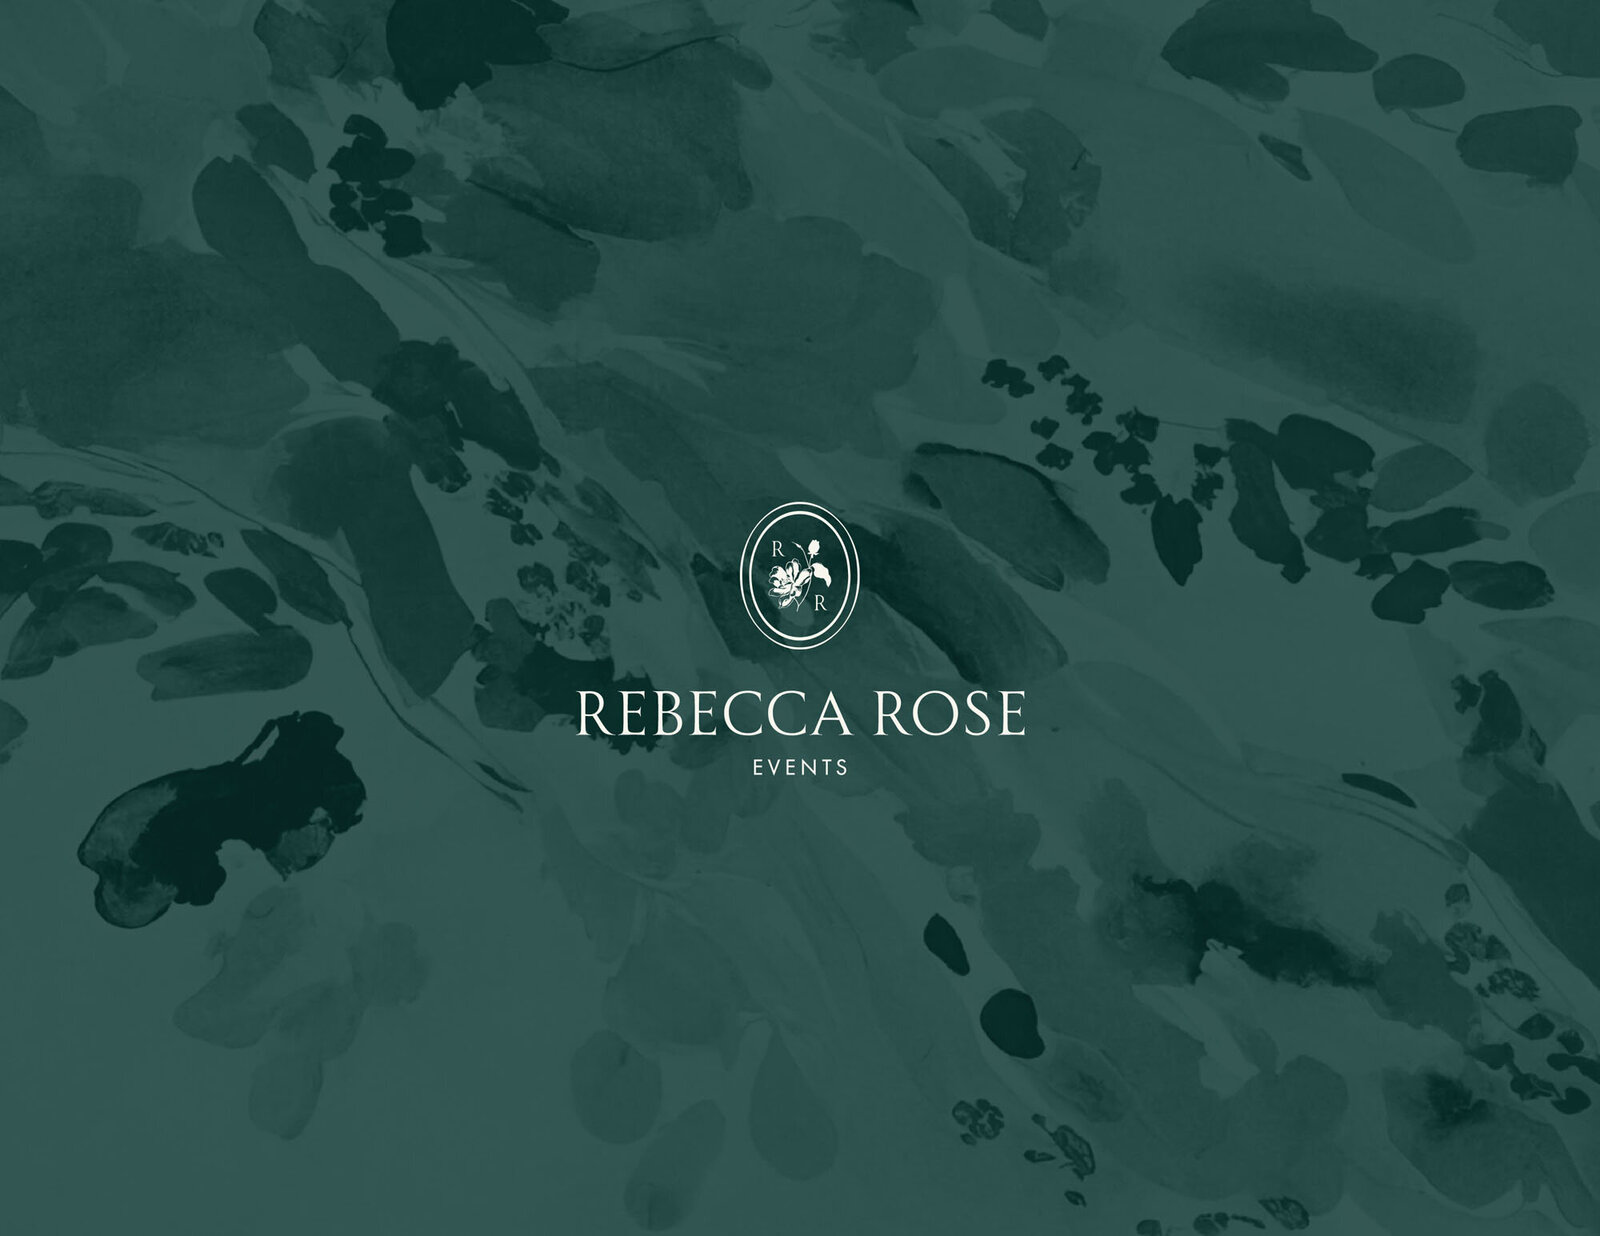 visual-identity-graphics-by letter-south-for-rebecca-rose-events-luxury-wedding-plannerRRE-Concept-primary-pattern